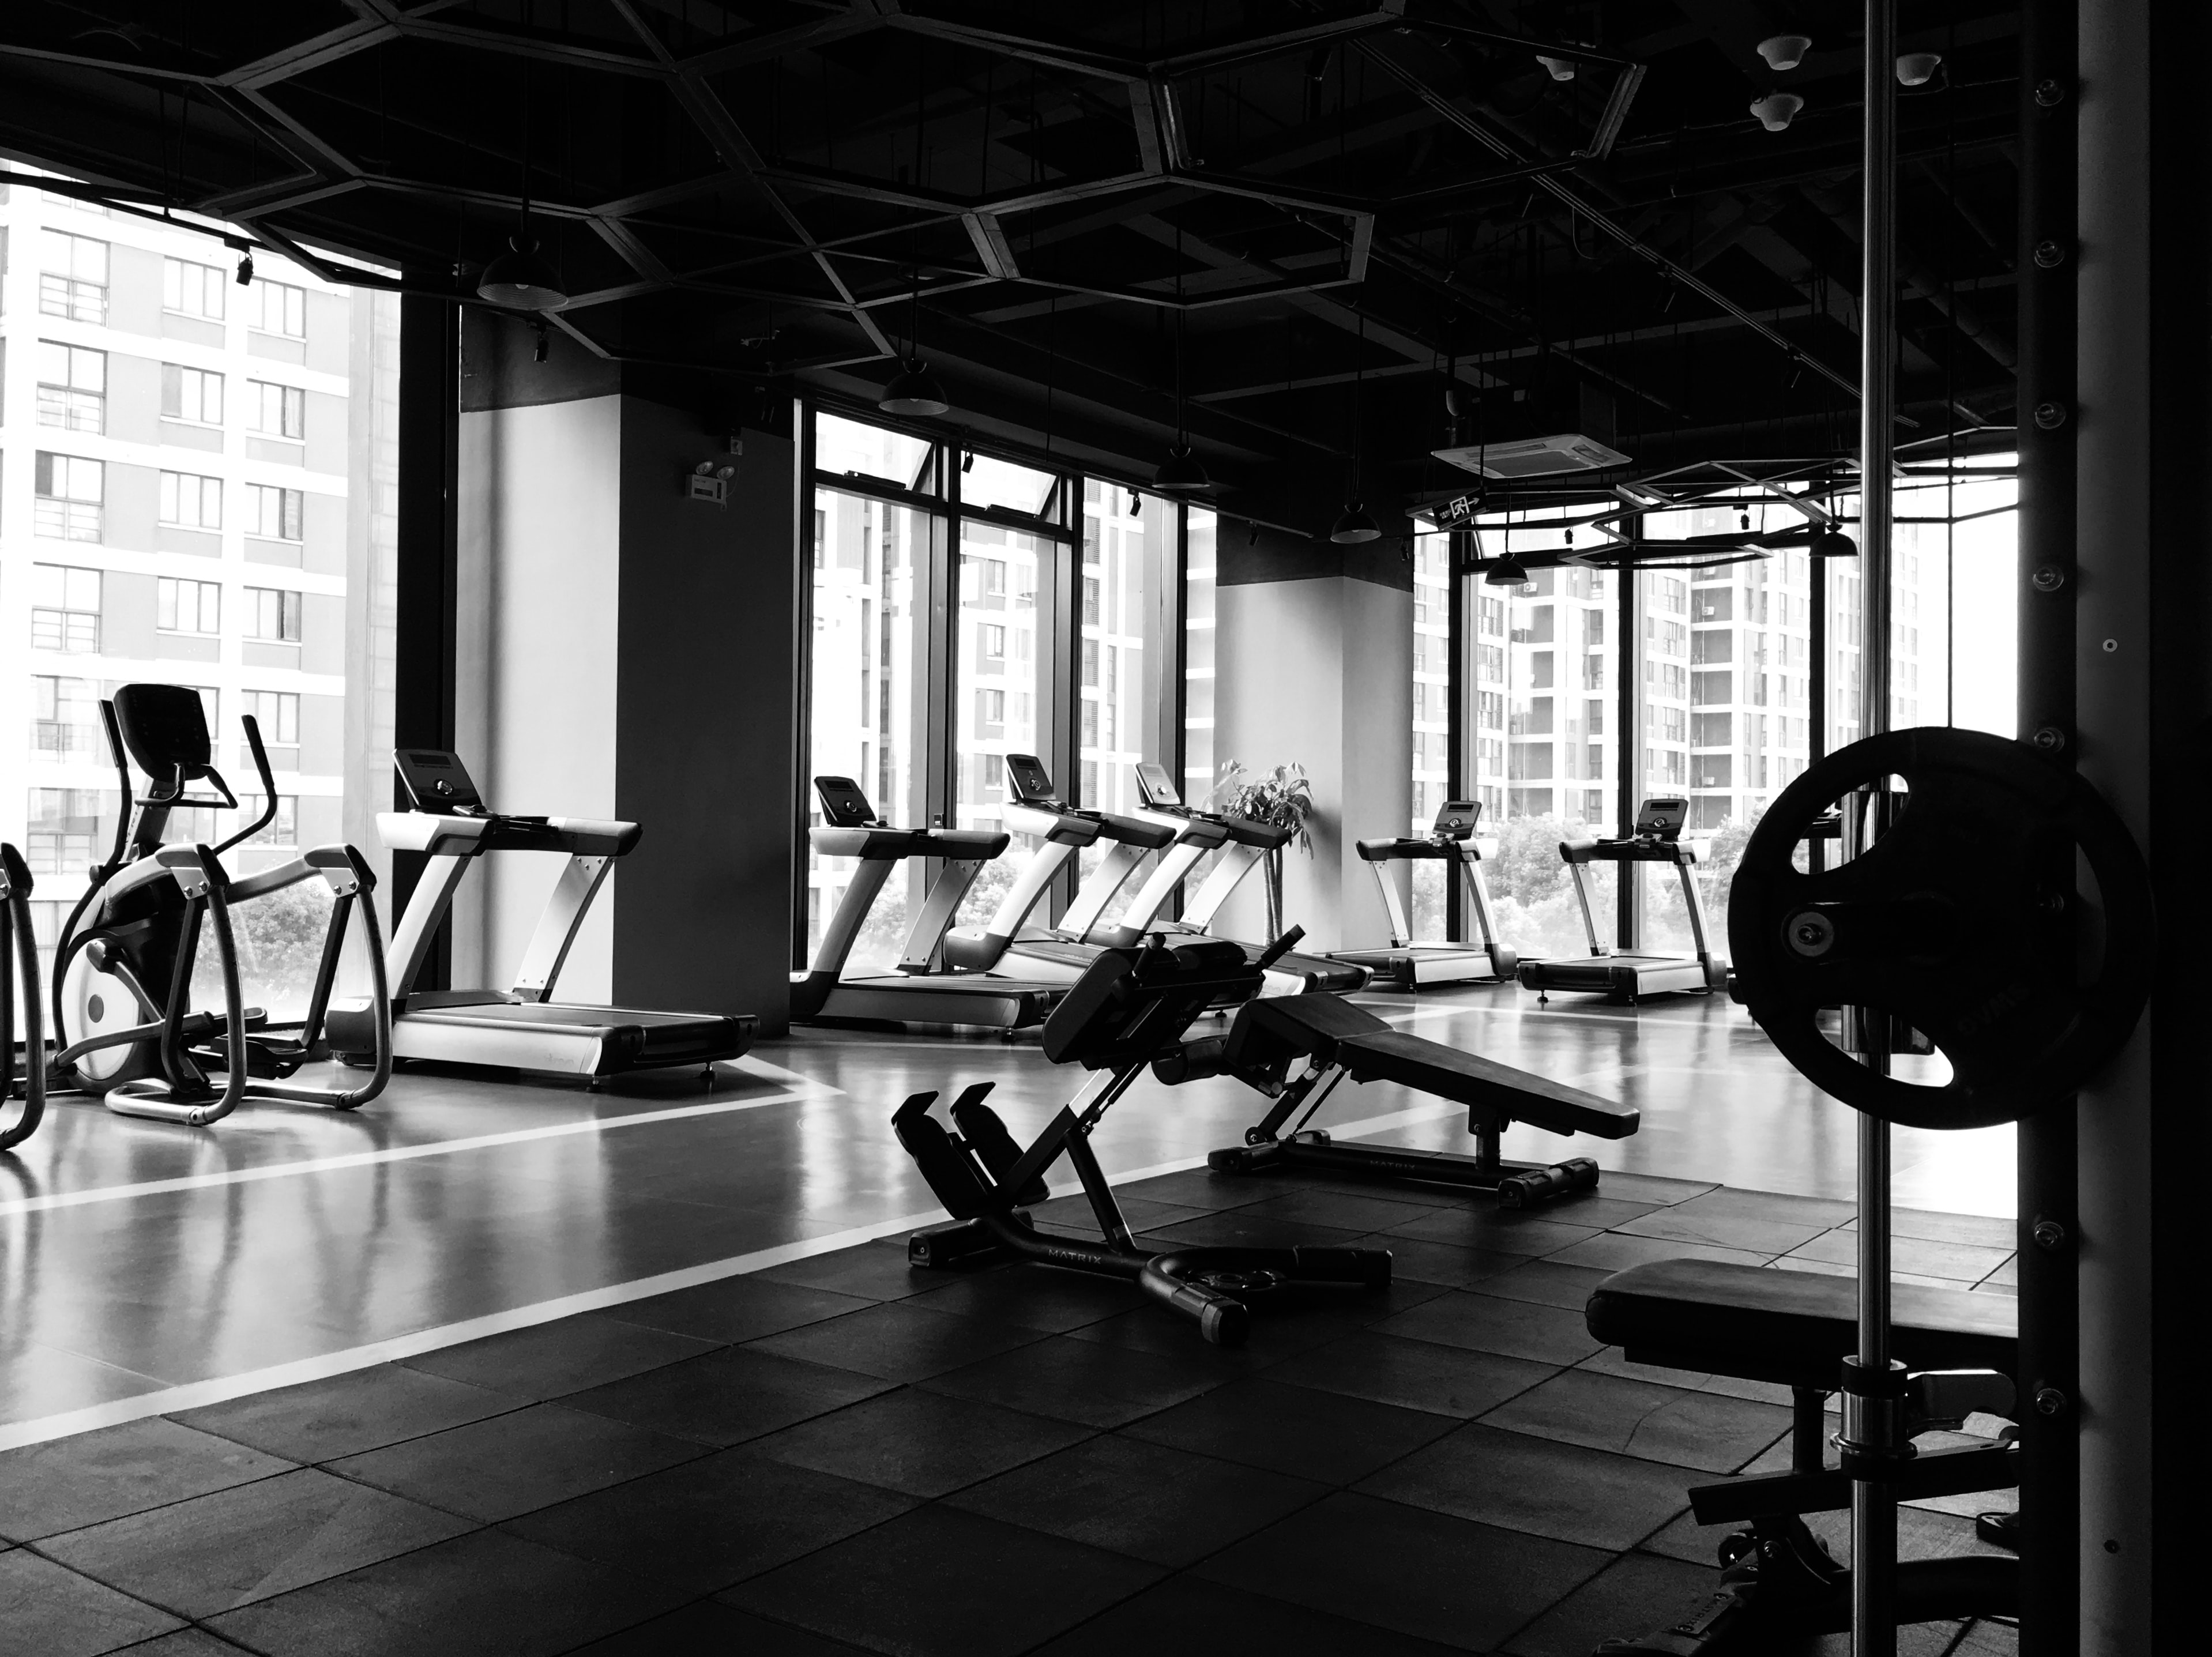 gym wallpaper hd, gym, physical fitness, room, exercise equipment, sport venue, strength training, black and white, weight training, crossfit, monochrome